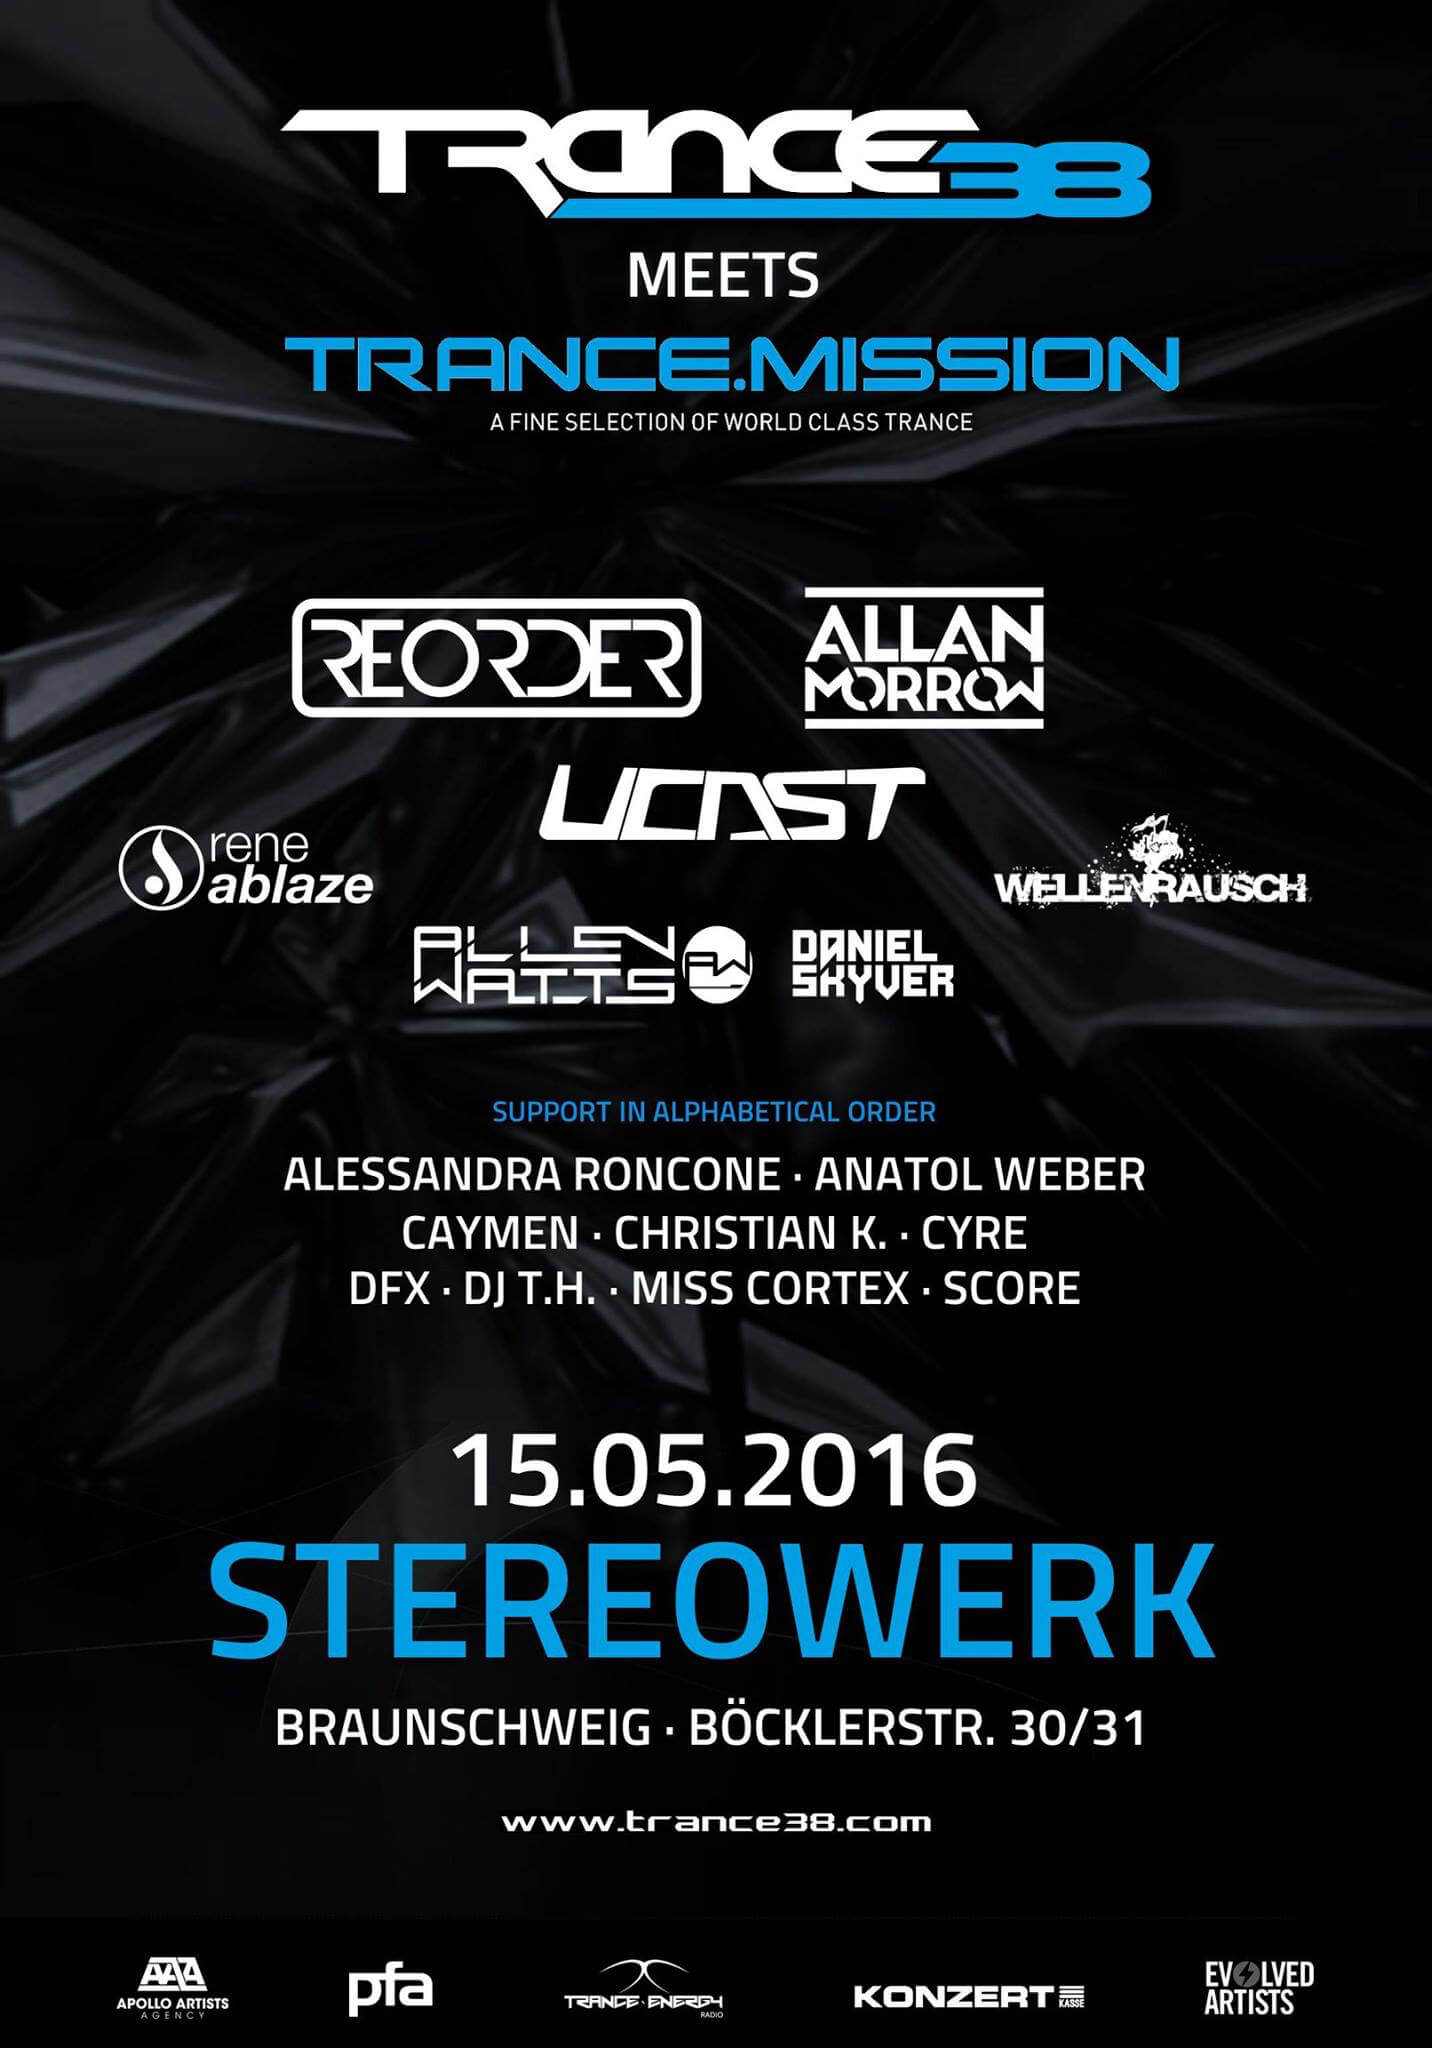 Trance38 meets Trance.Mission at Stereowerk, Braunschweigh, Germany on 15th of May 2016